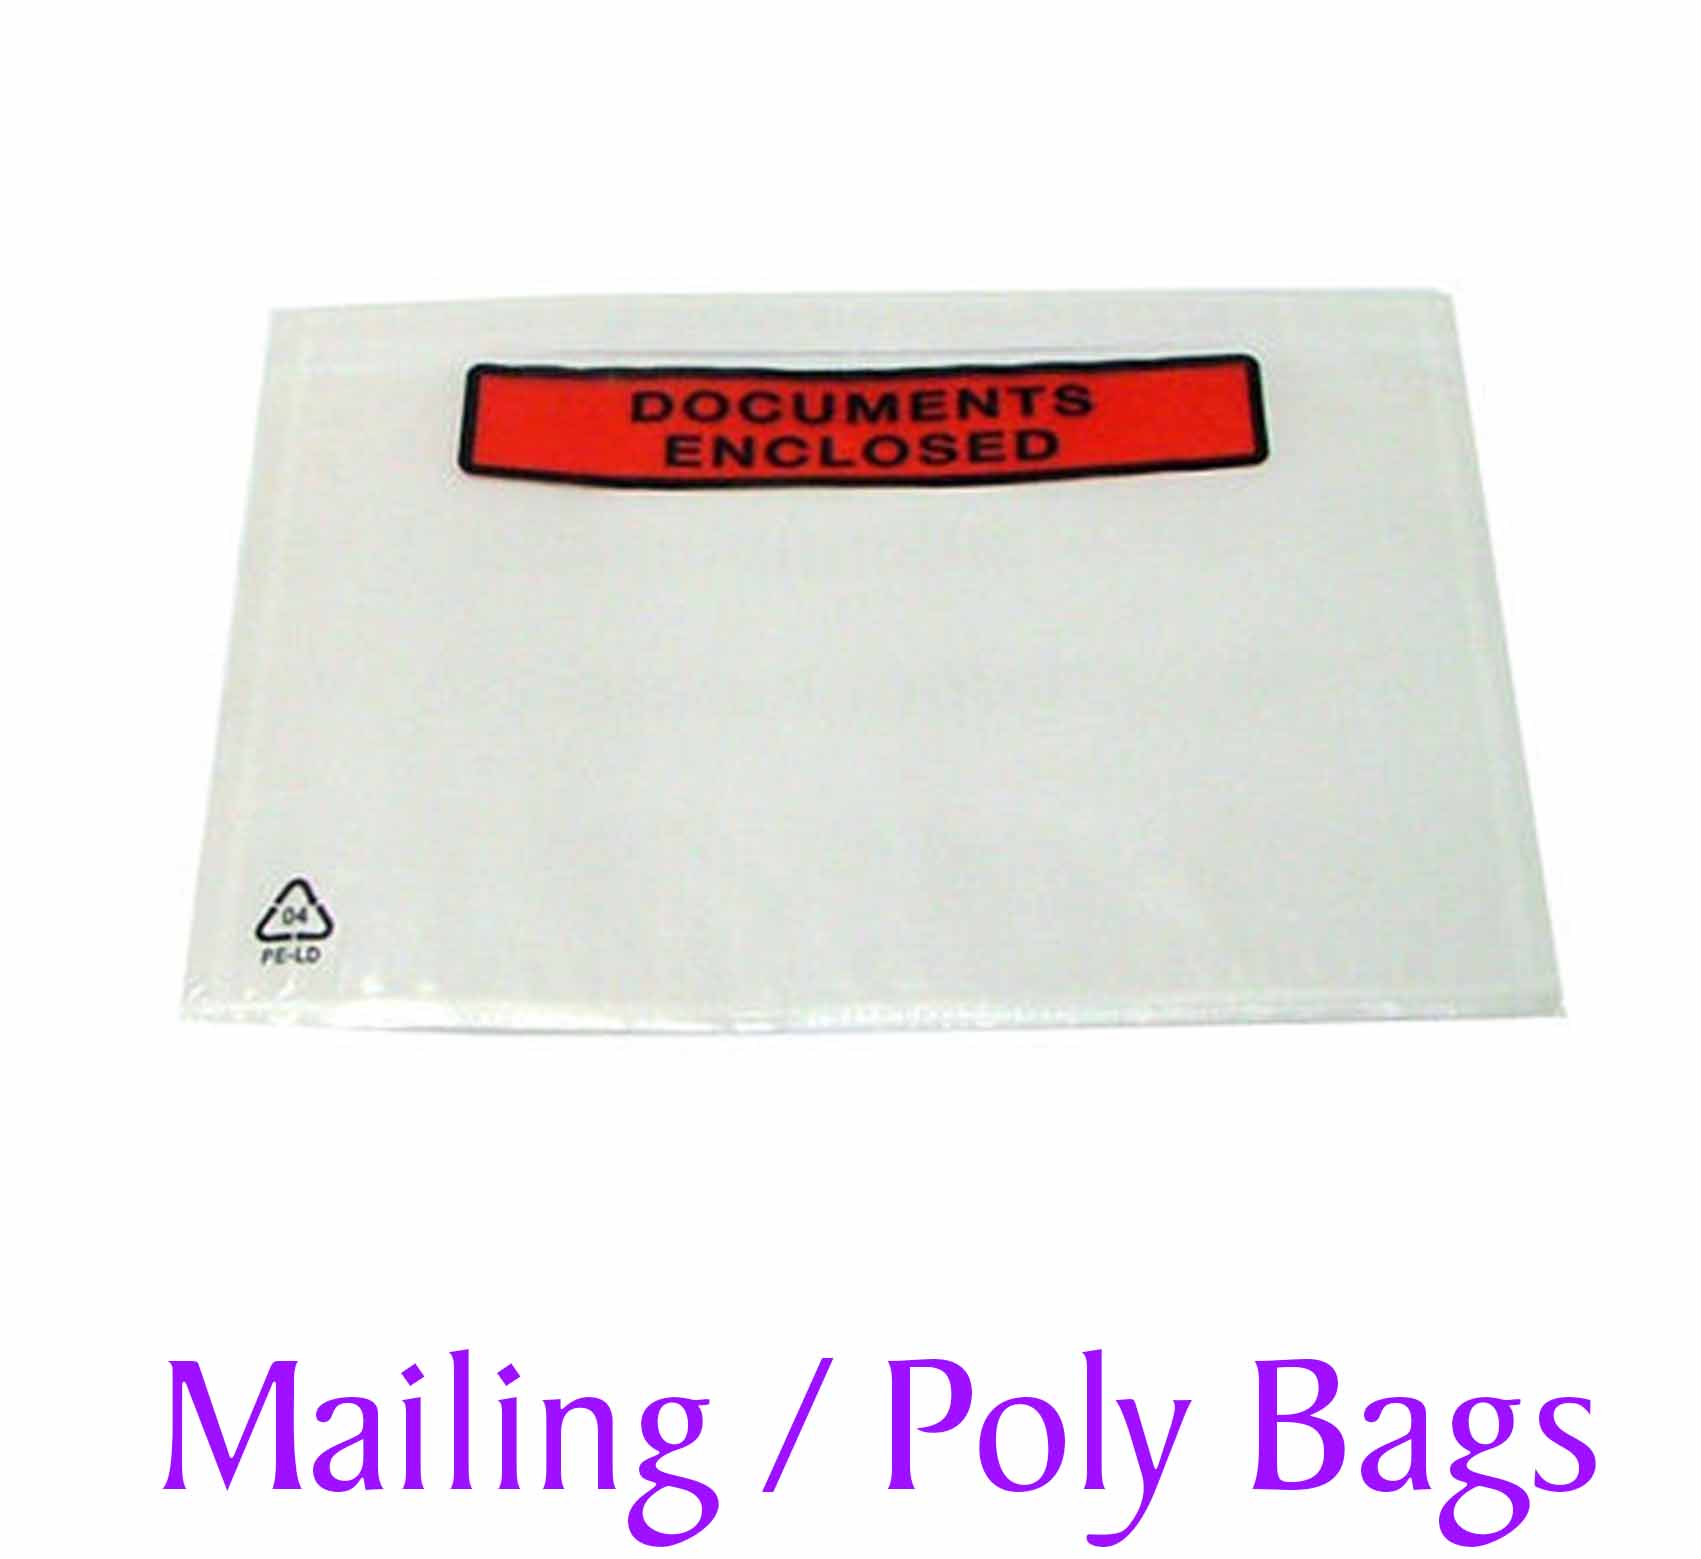 mailing bags, poly bags, postage, bags, document bag